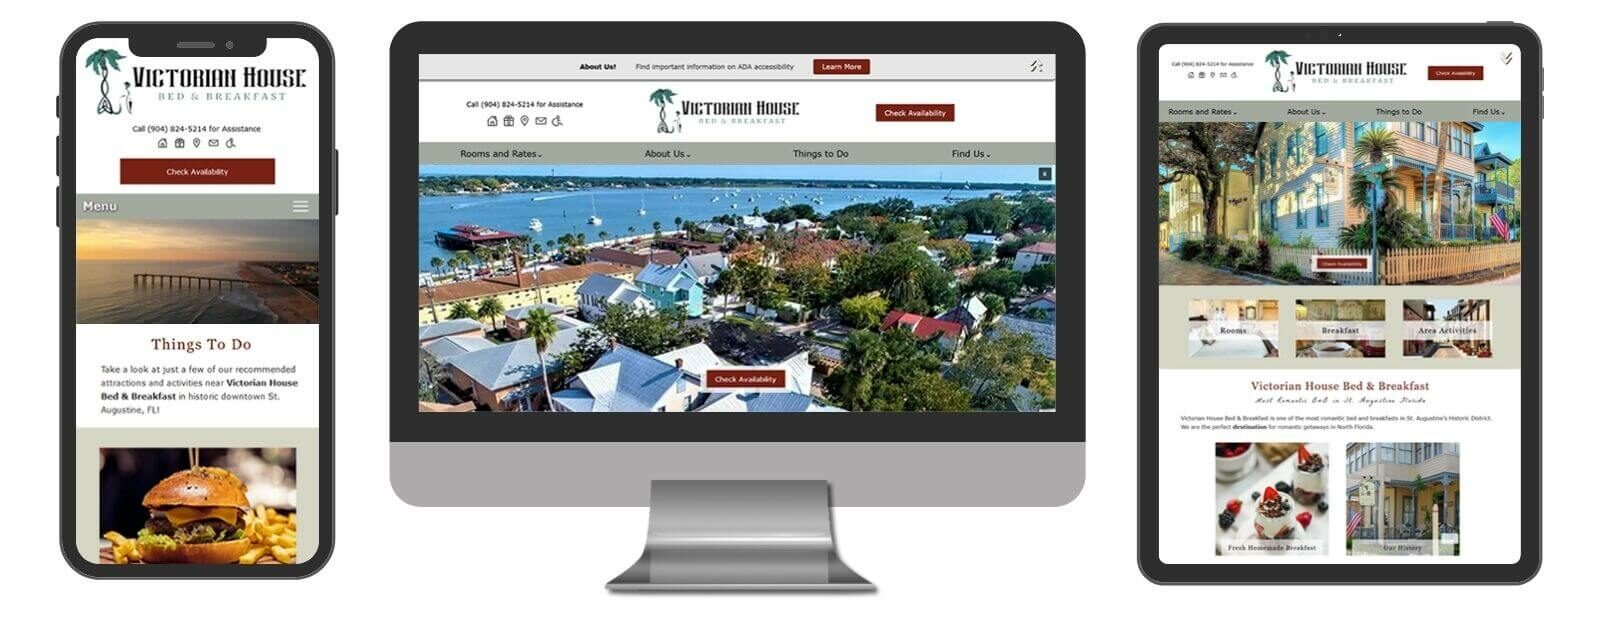 Screenshot of Desktop, Mobile and tablet views of the website for Victorian House Bed & Breakfast